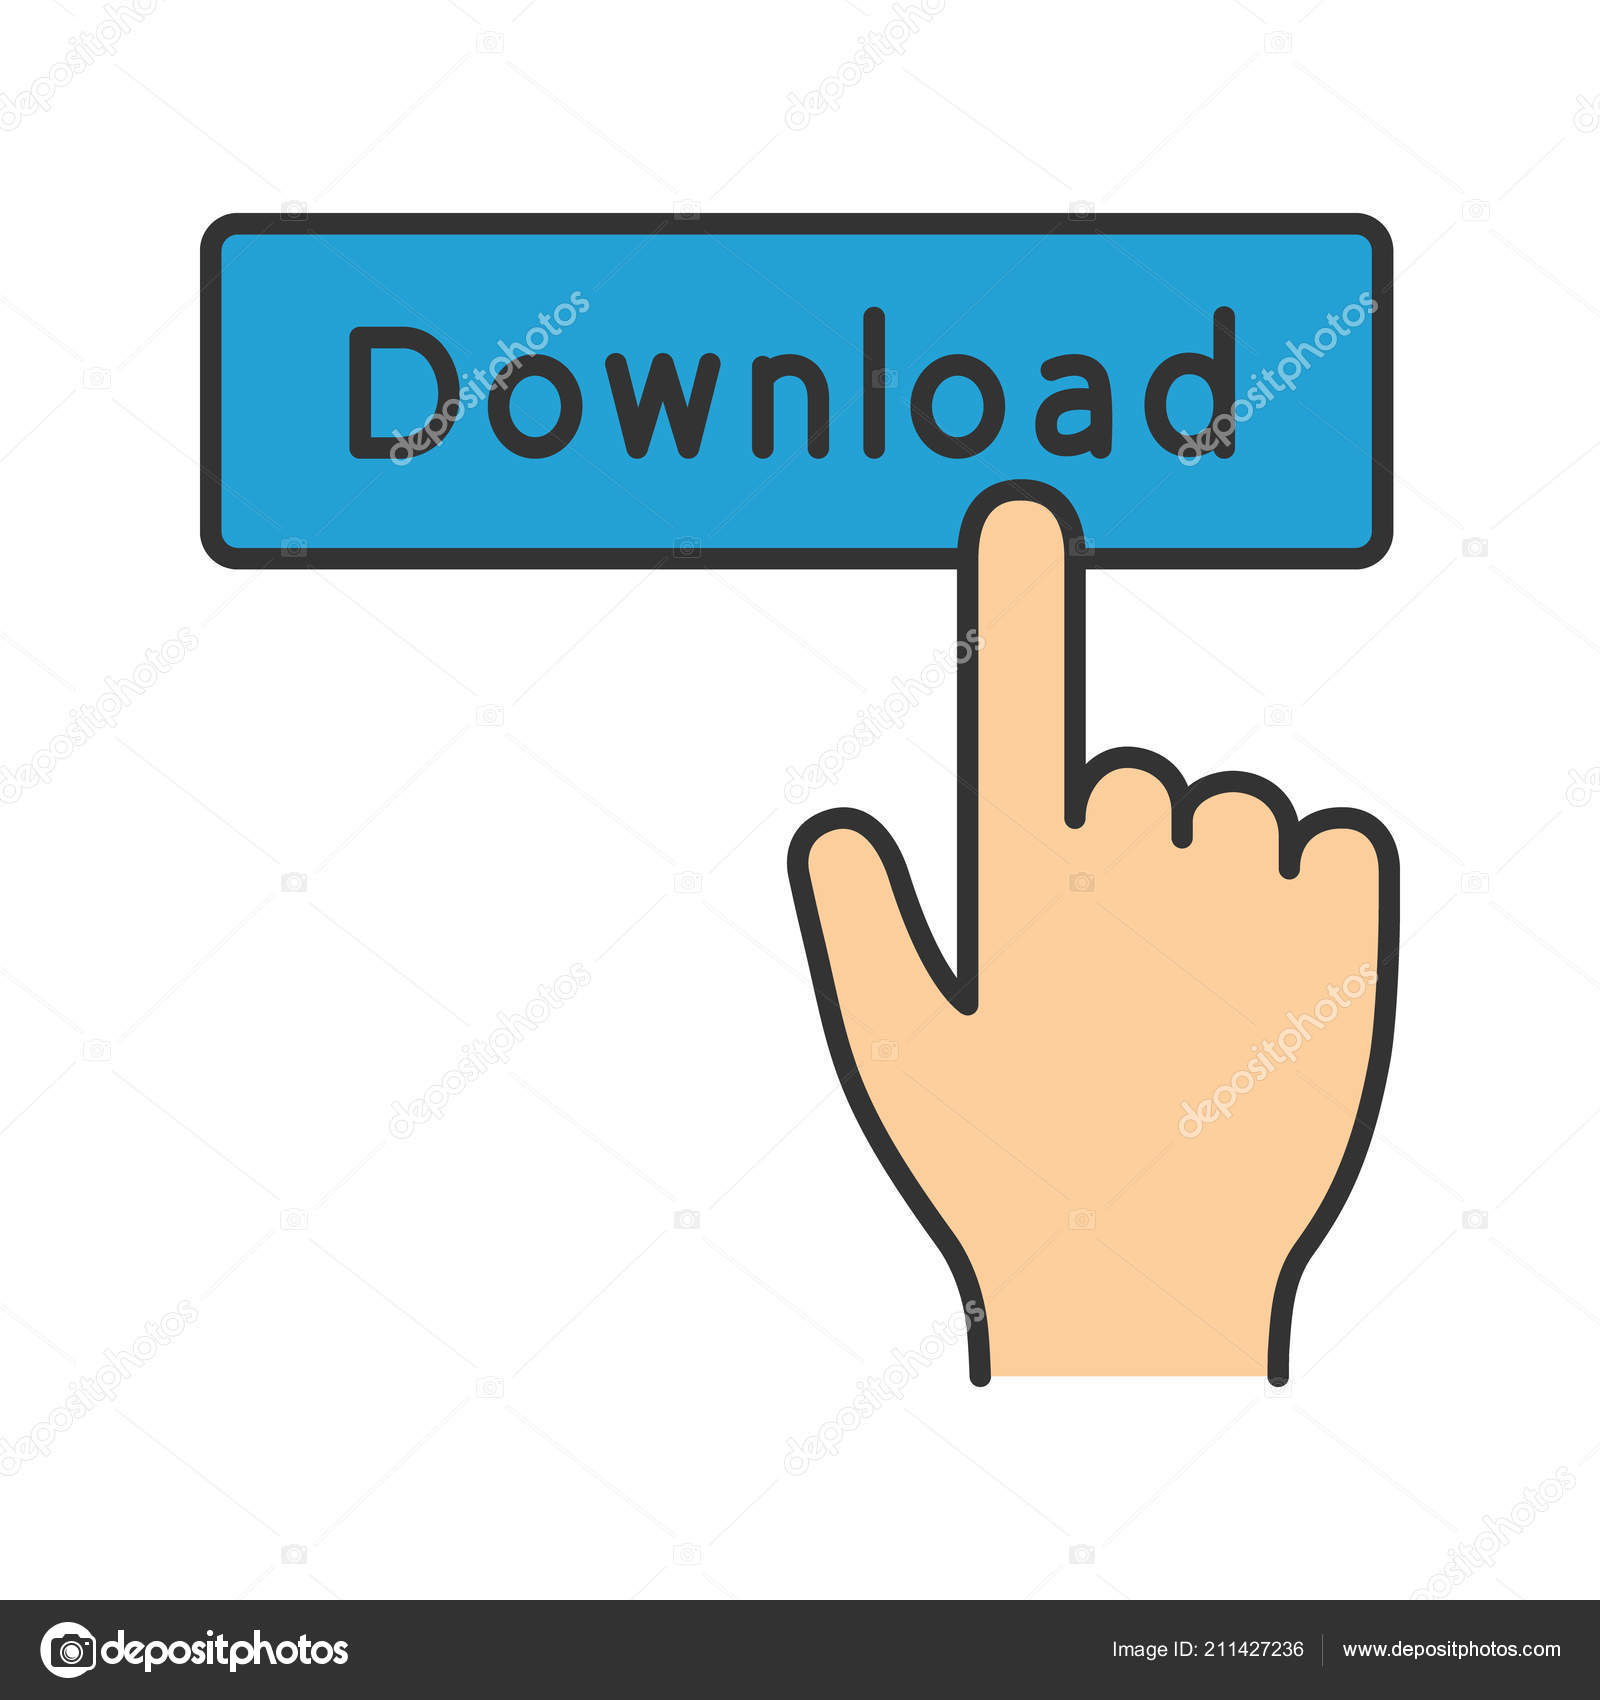 depositphotos 211427236 stock illustration hand pressing download button color - Updated Washington